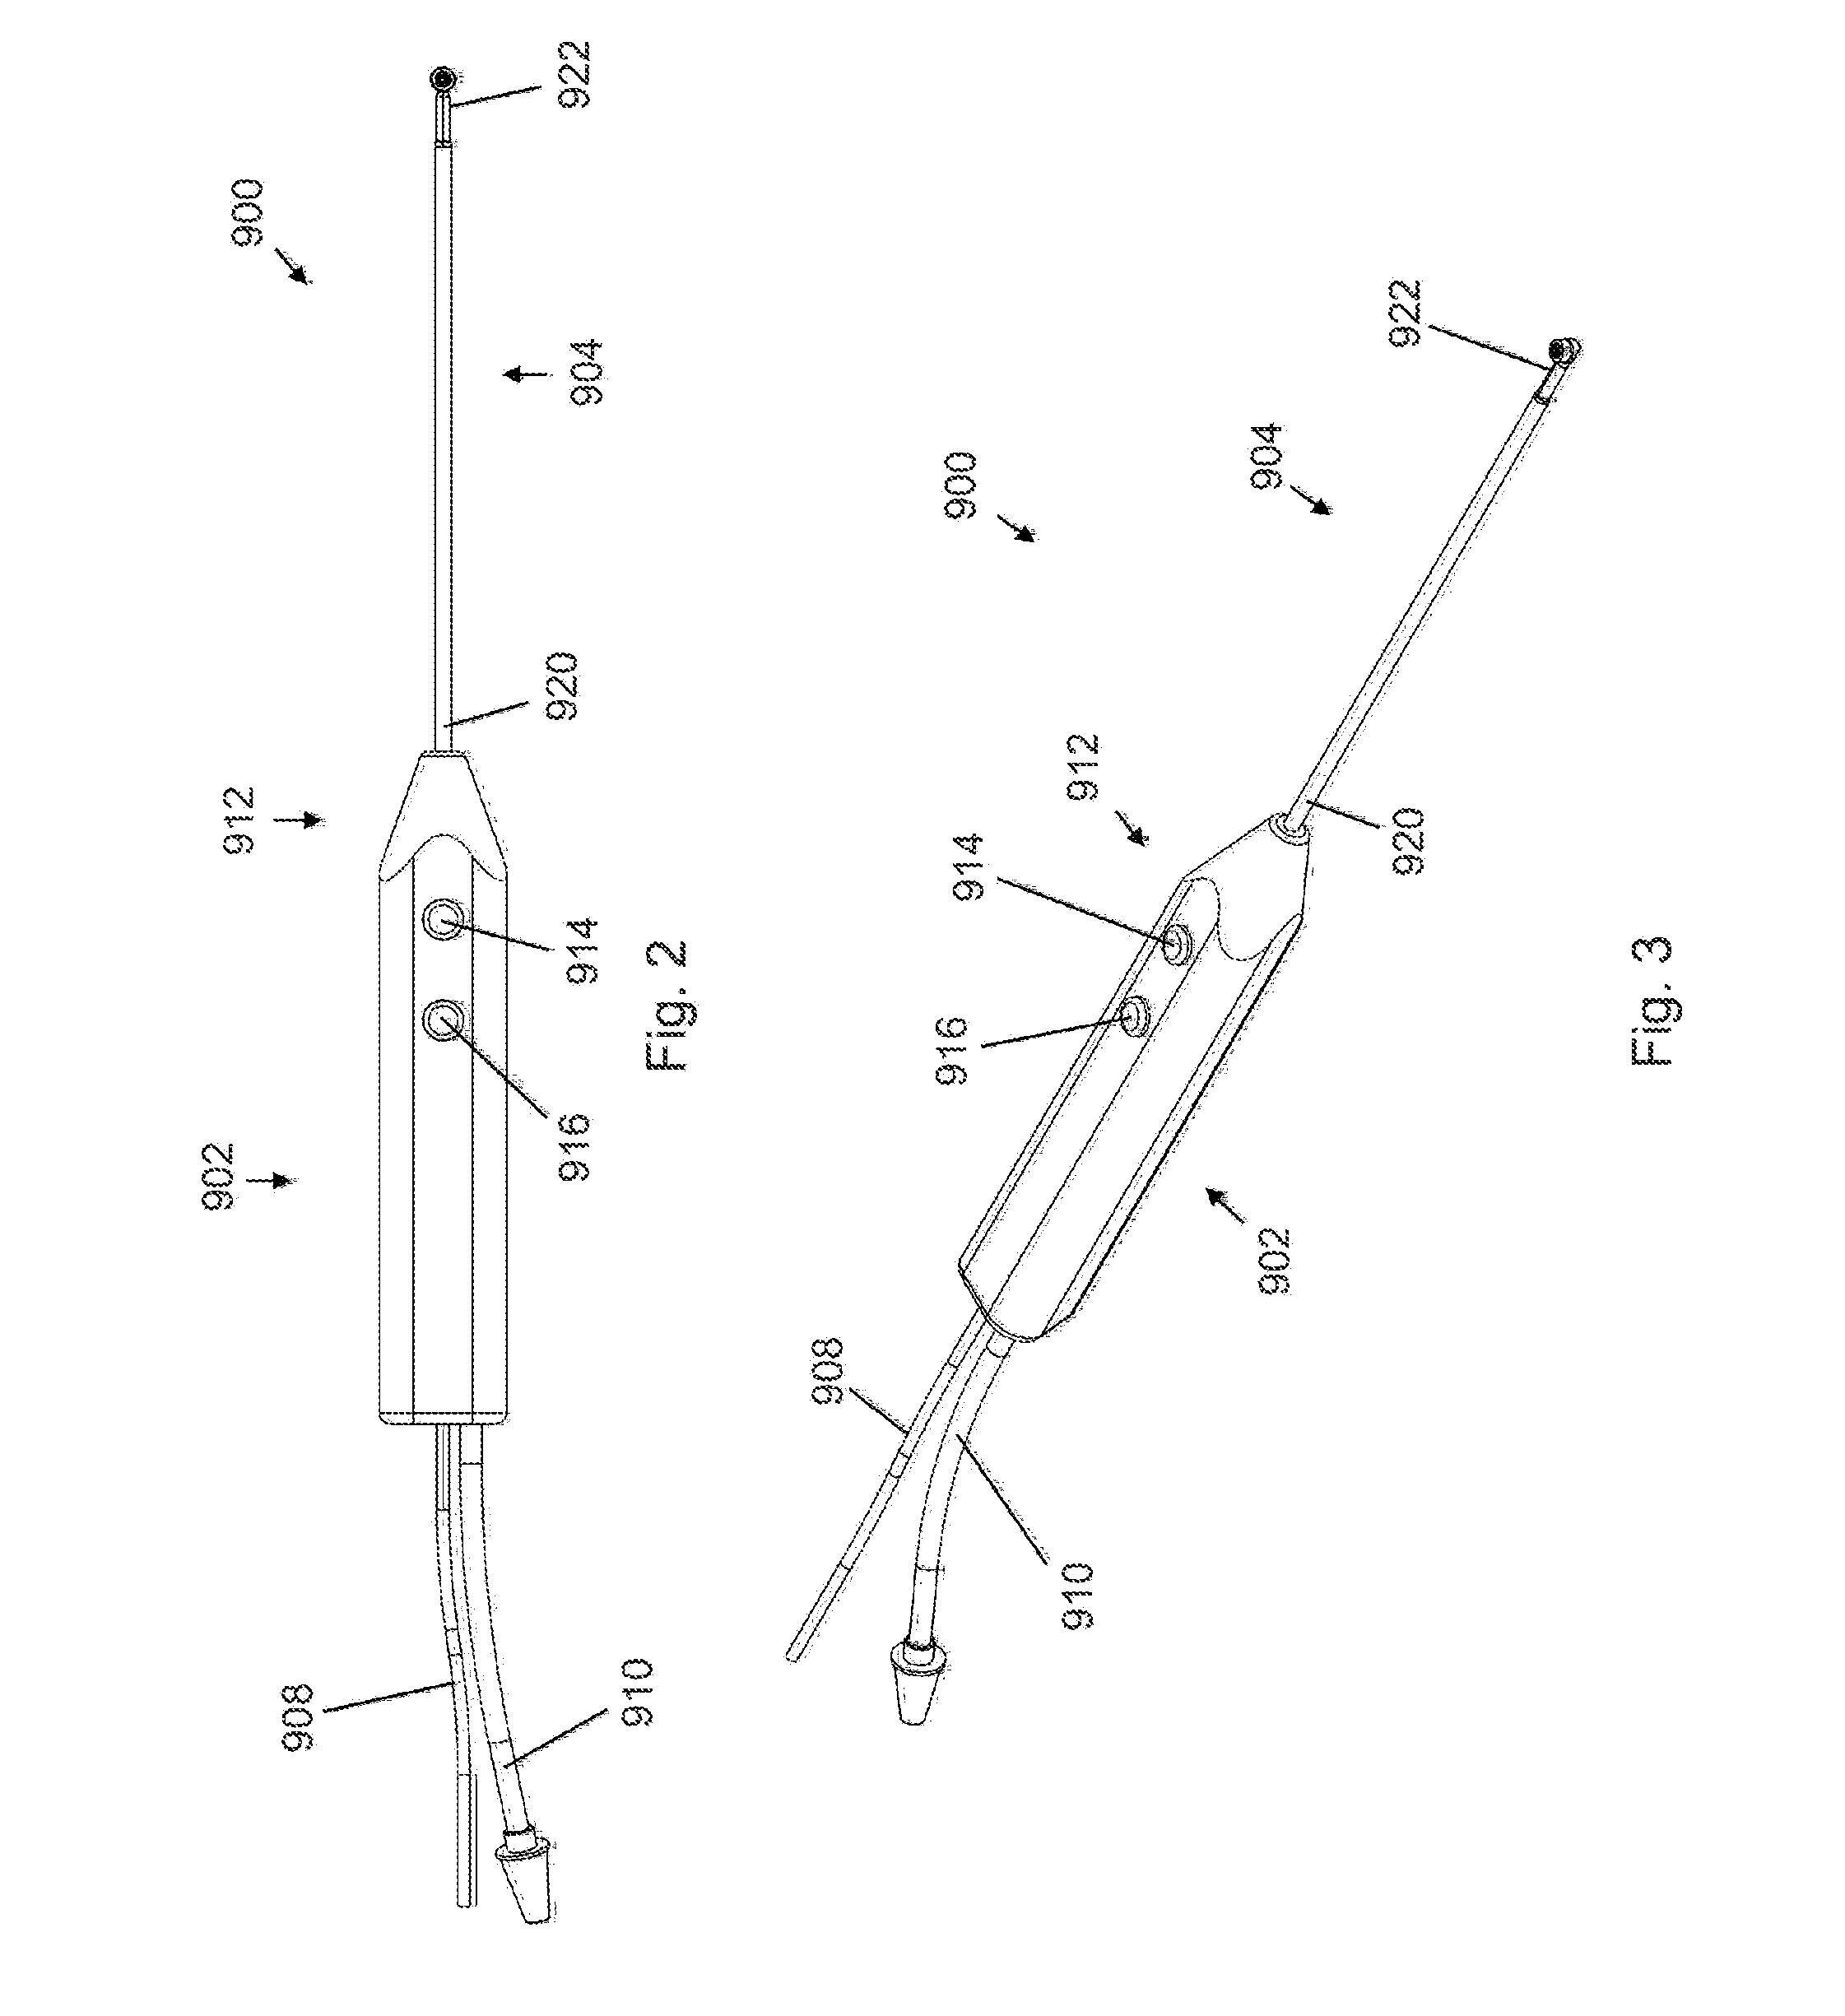 Flexible electrosurgical ablation and aspiration electrode with beveled active surface